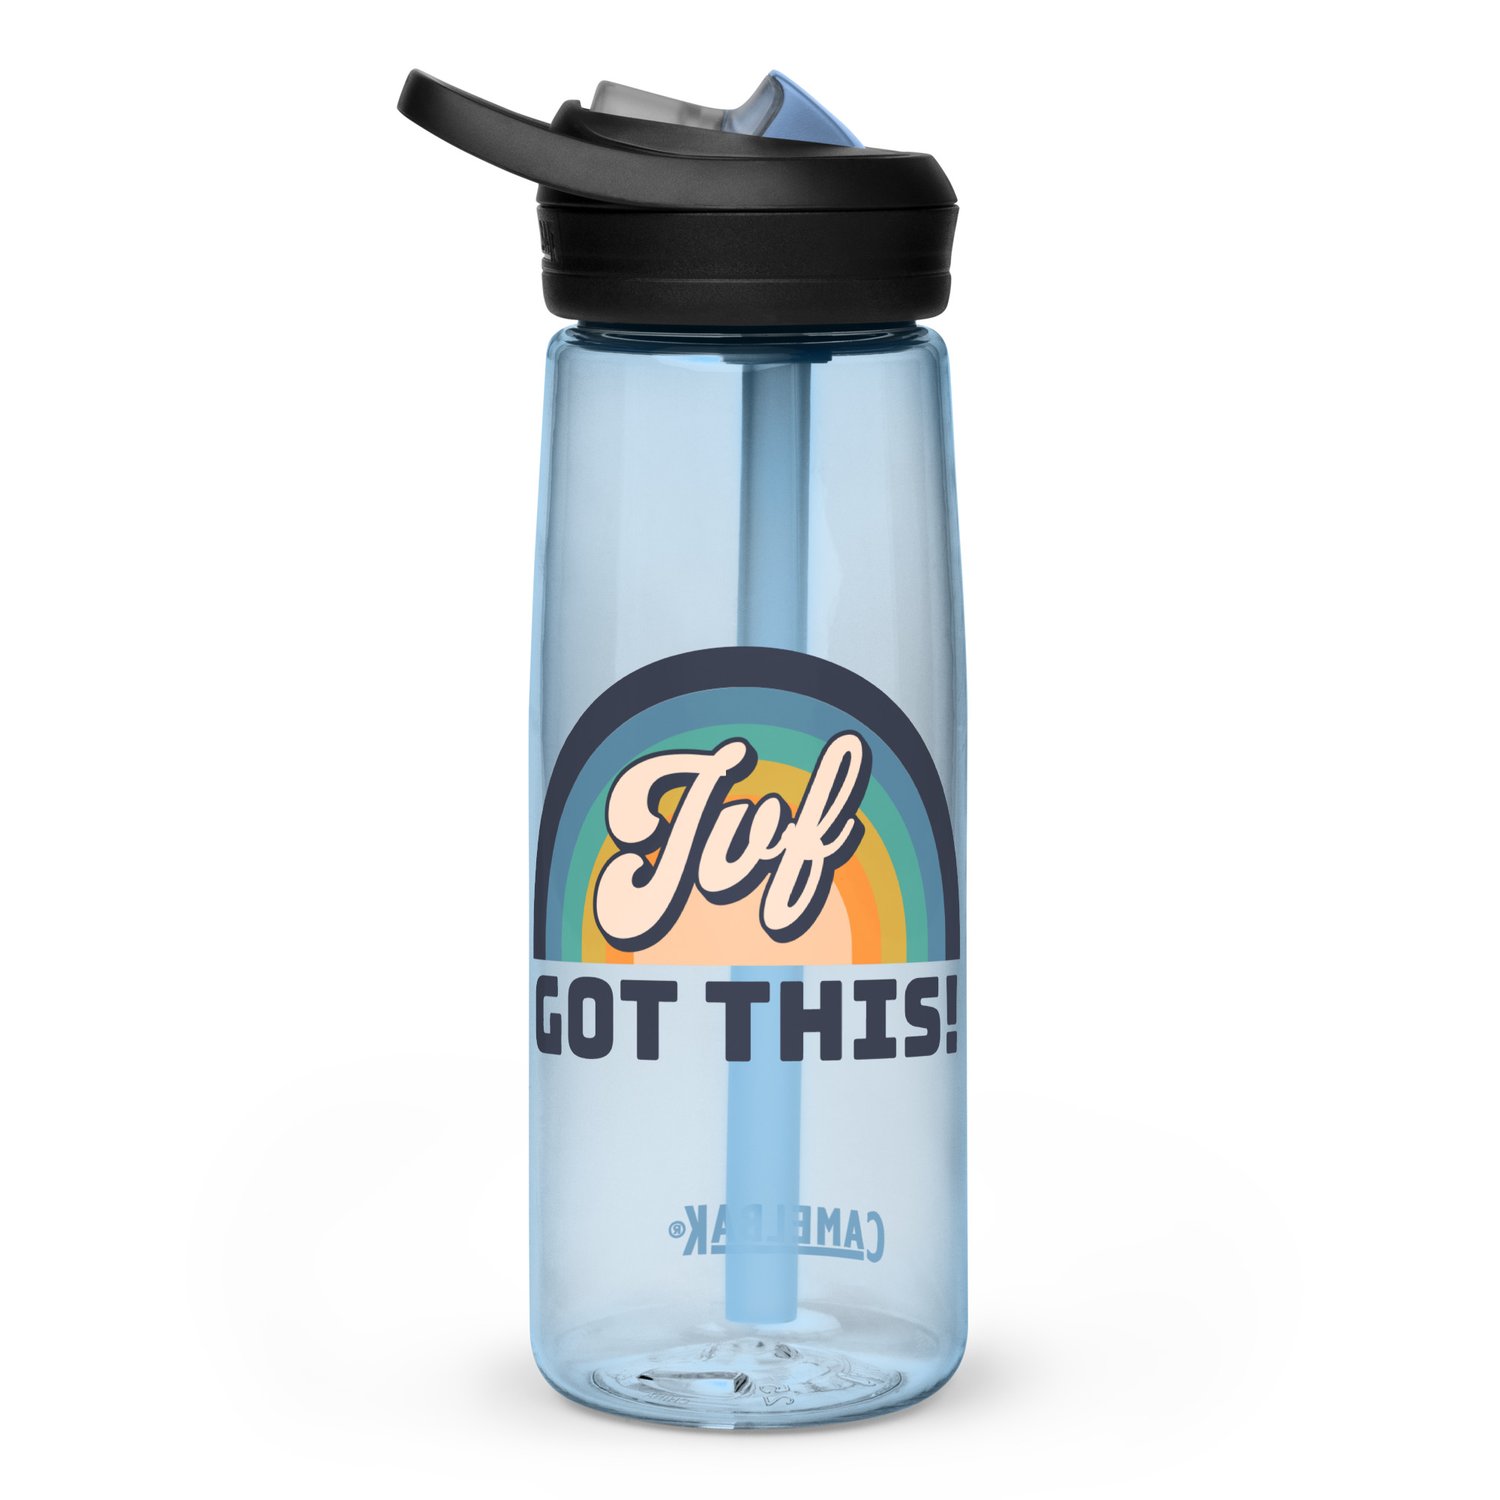 IVF Got This! Sports water bottle — The Surro Shop